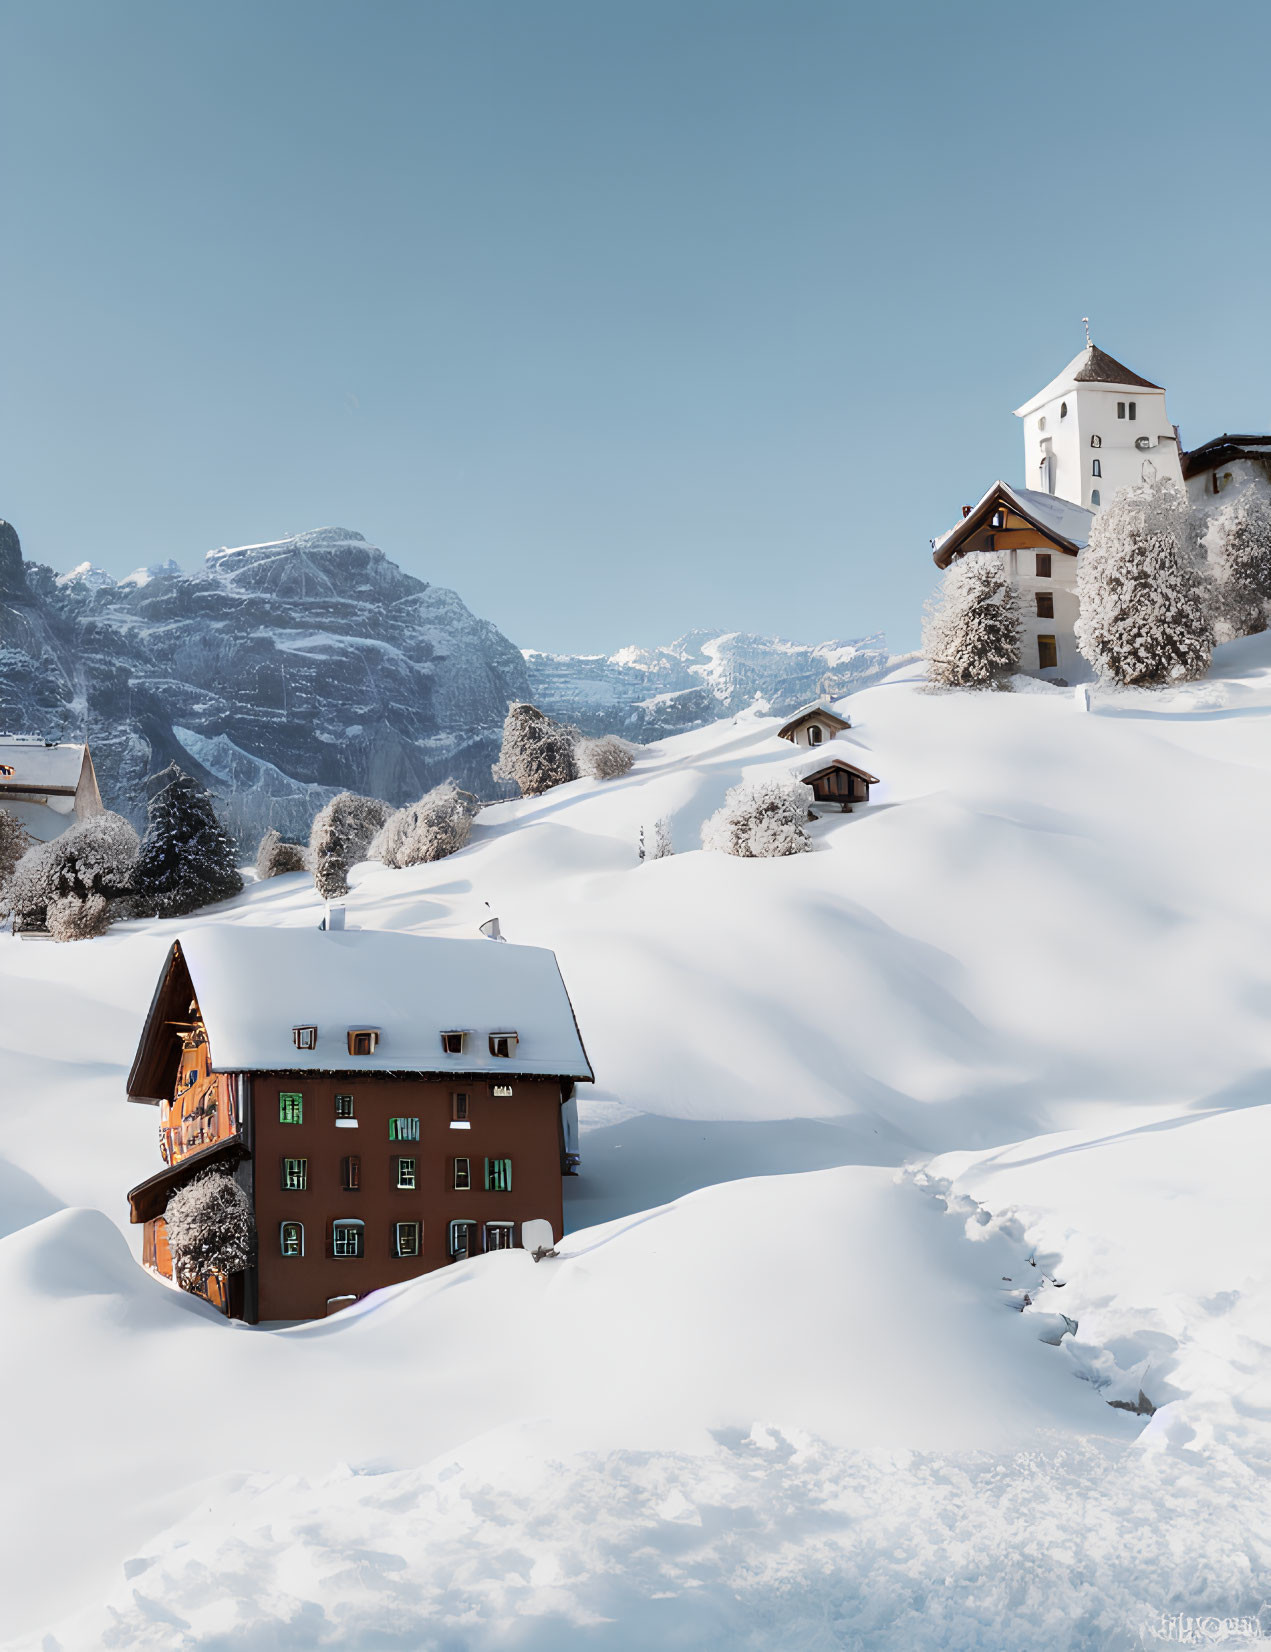 Snow-covered Alpine village with church and mountains under clear blue sky